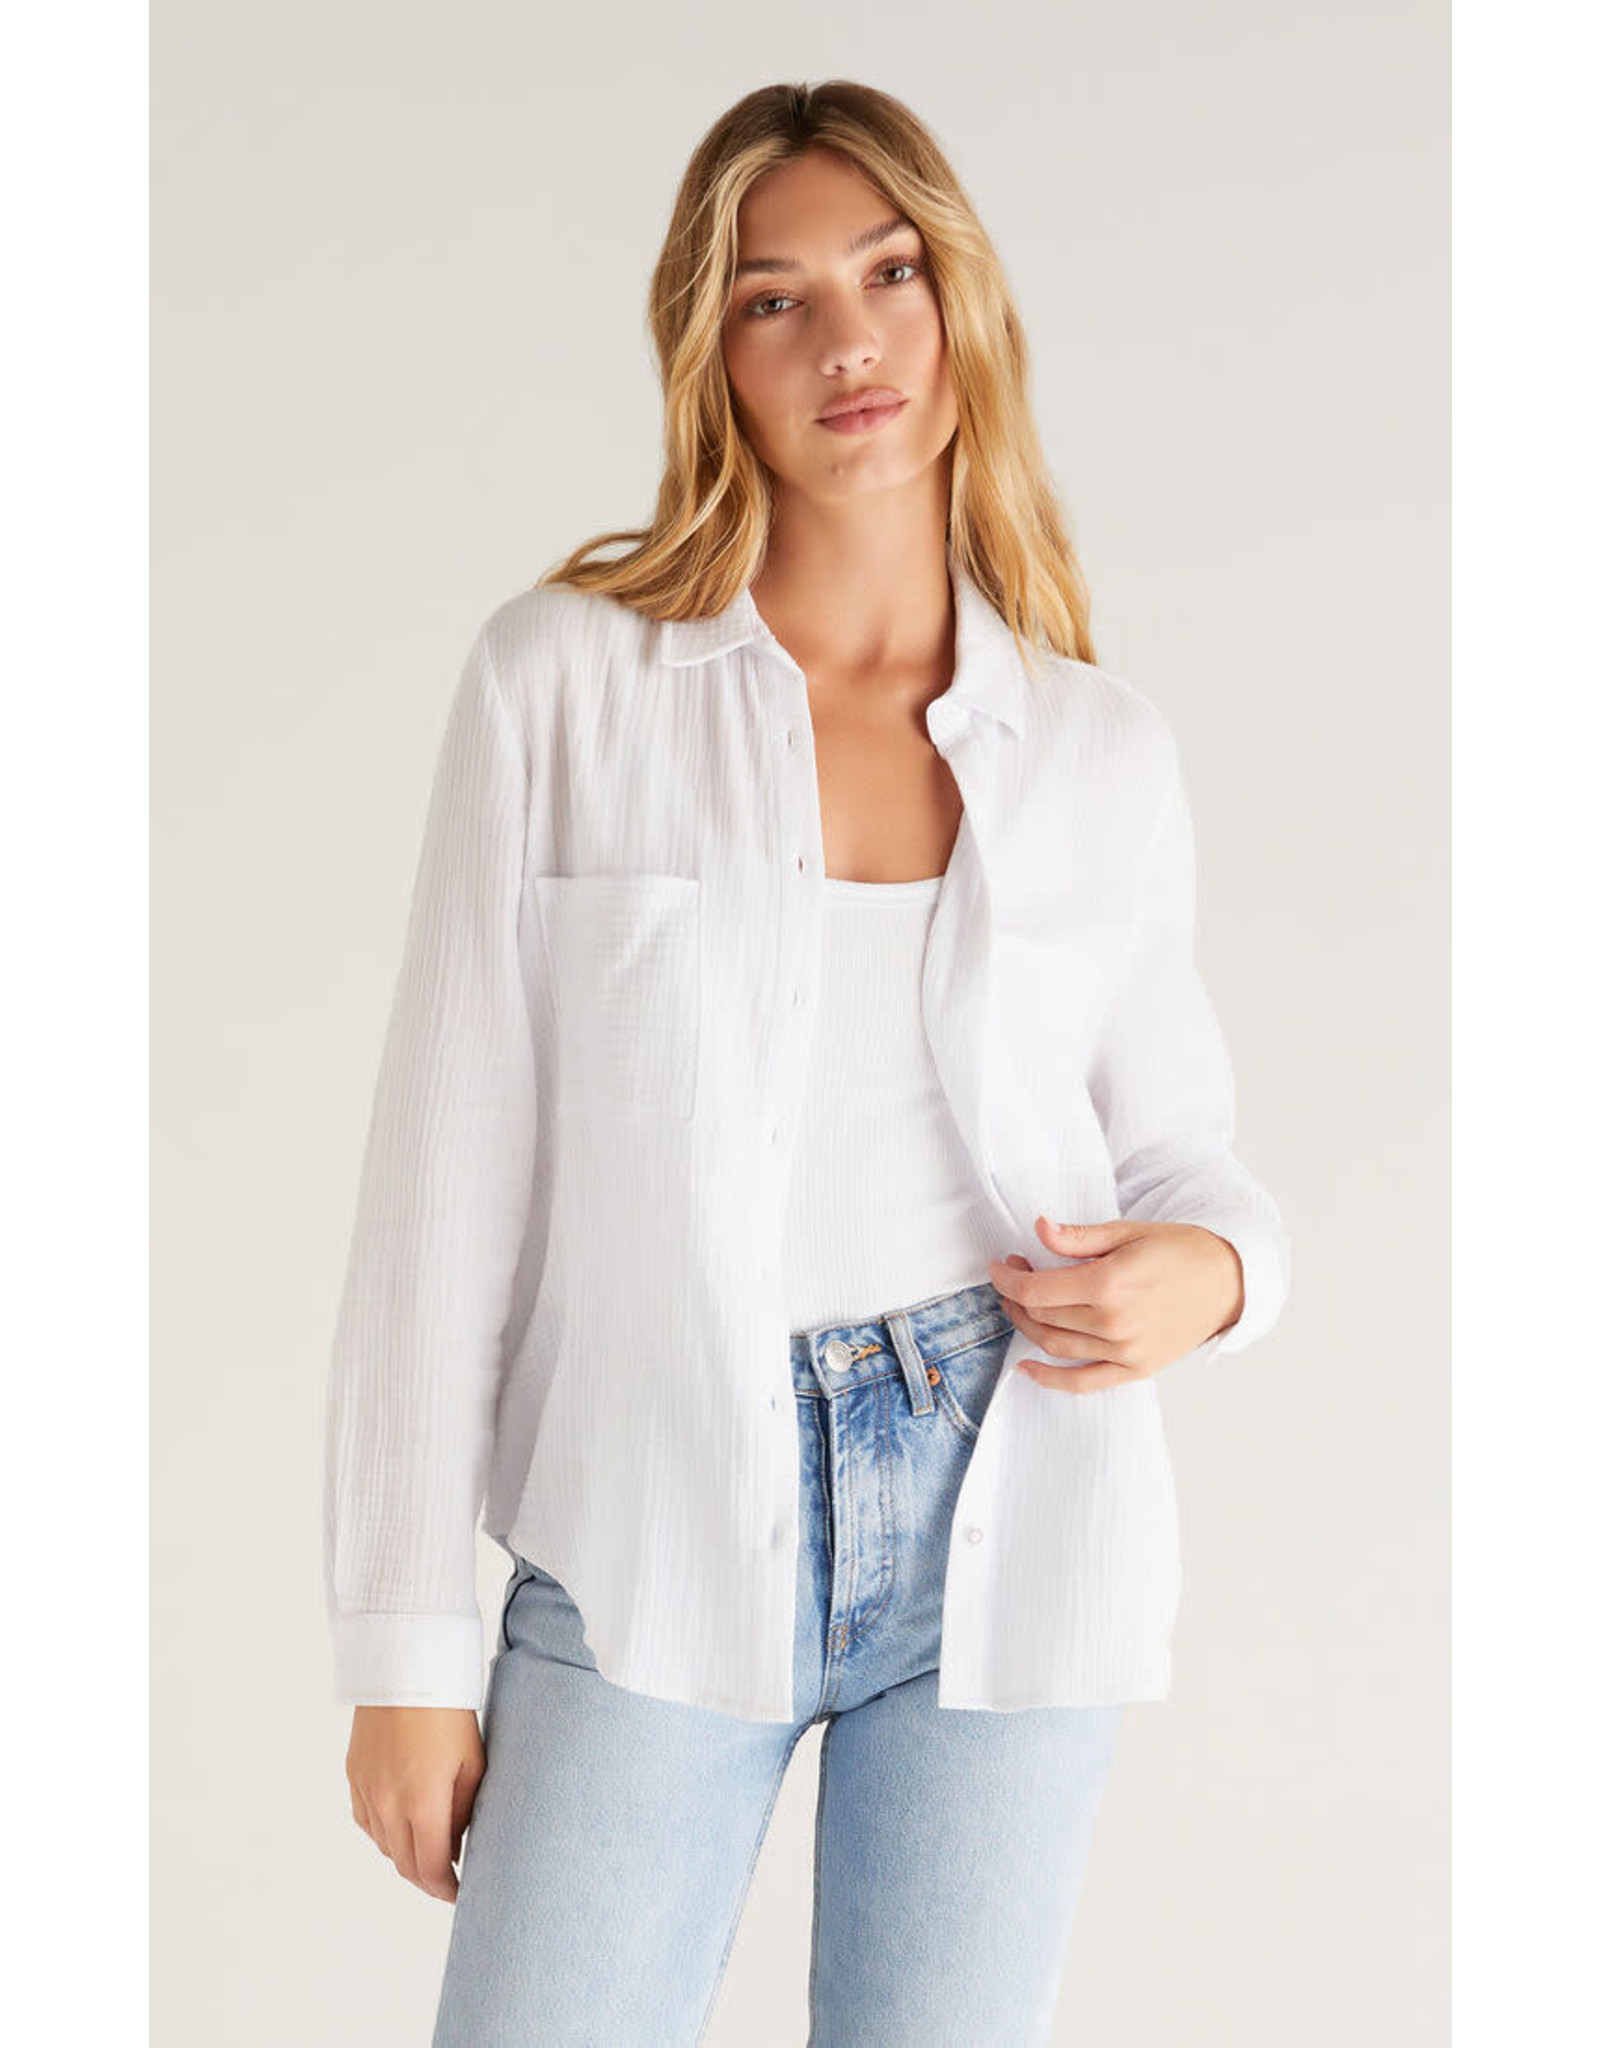 Z supply ZS Kaili Button Up Gauze Top